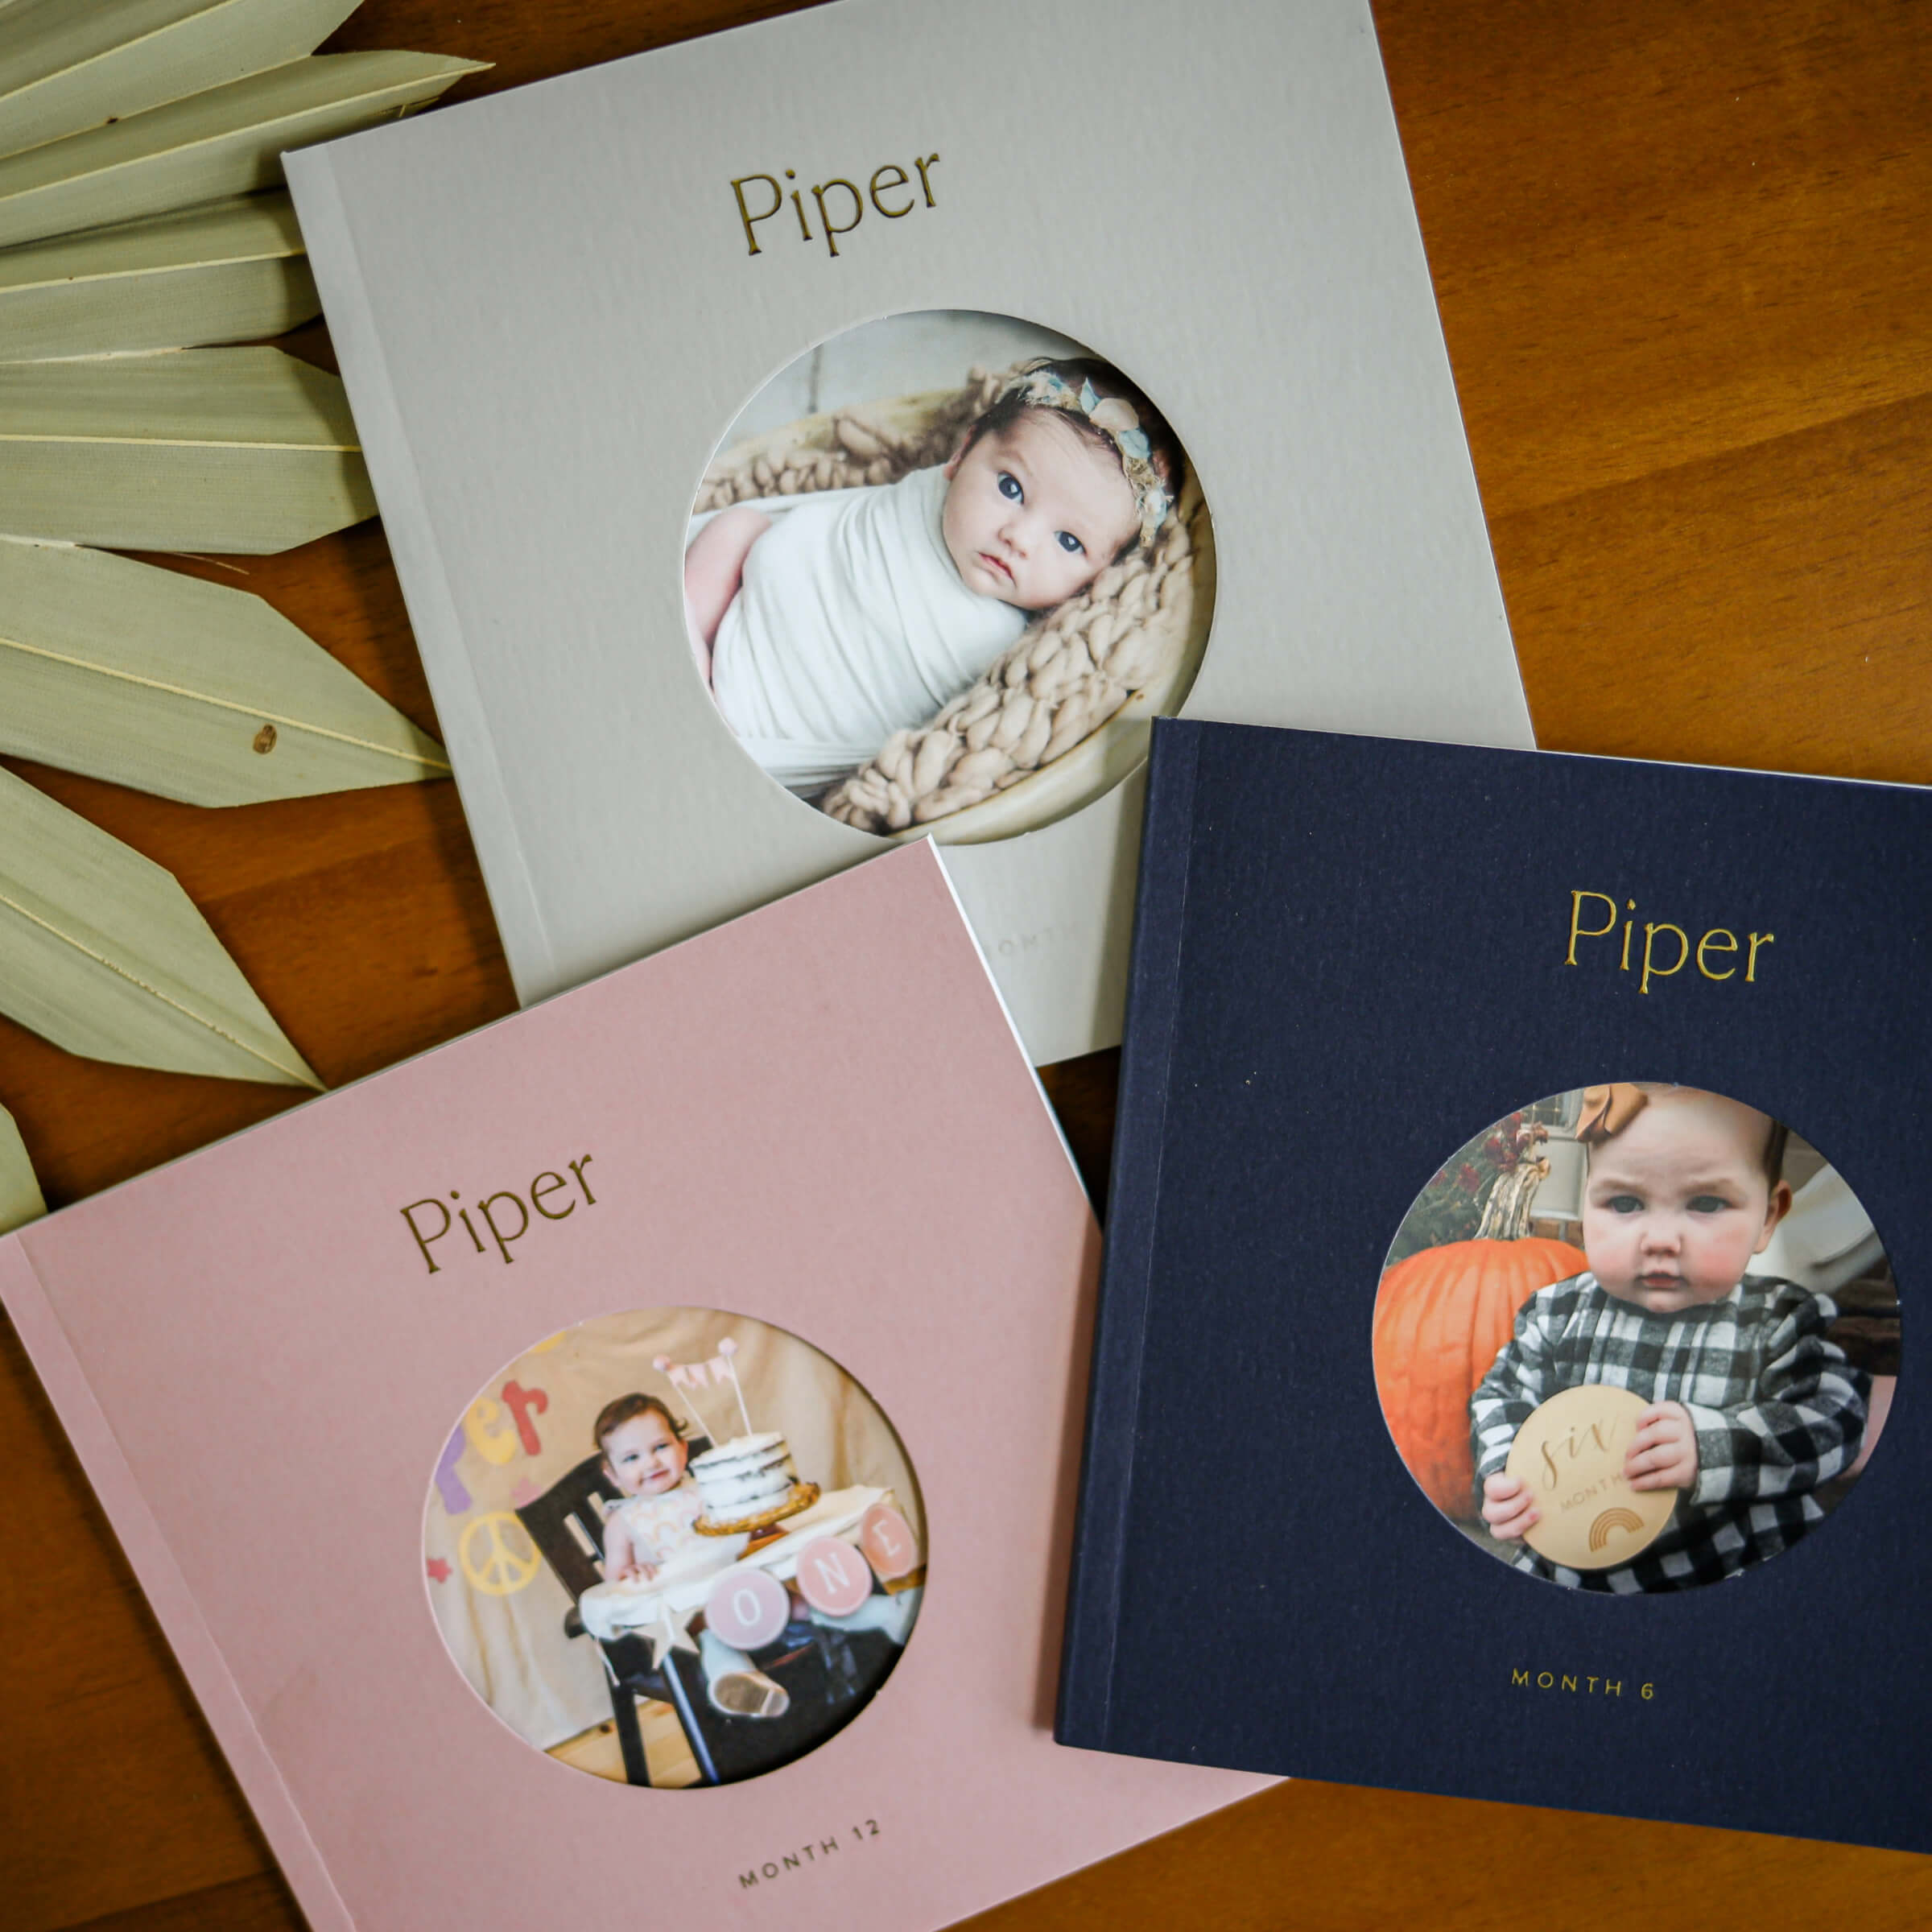 Three Artifact Uprising photo books of a baby growing up